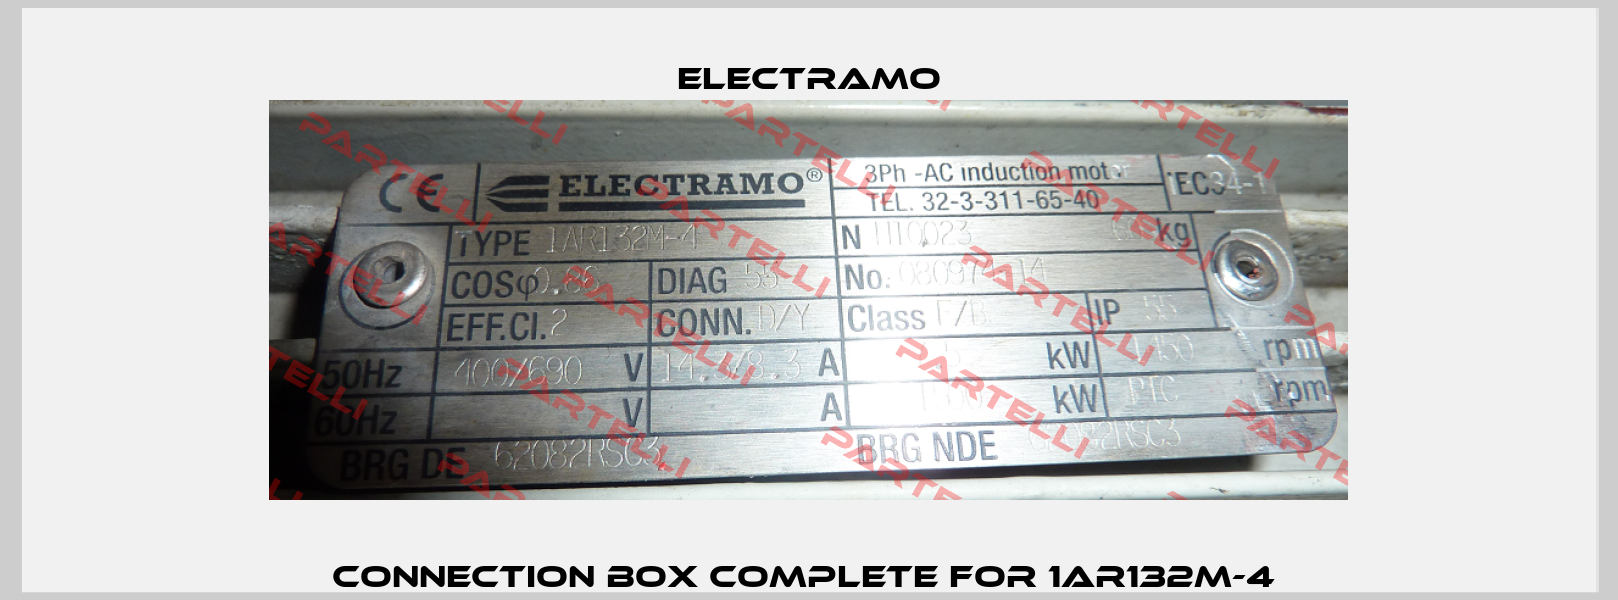 Connection box complete for 1AR132M-4  Electramo